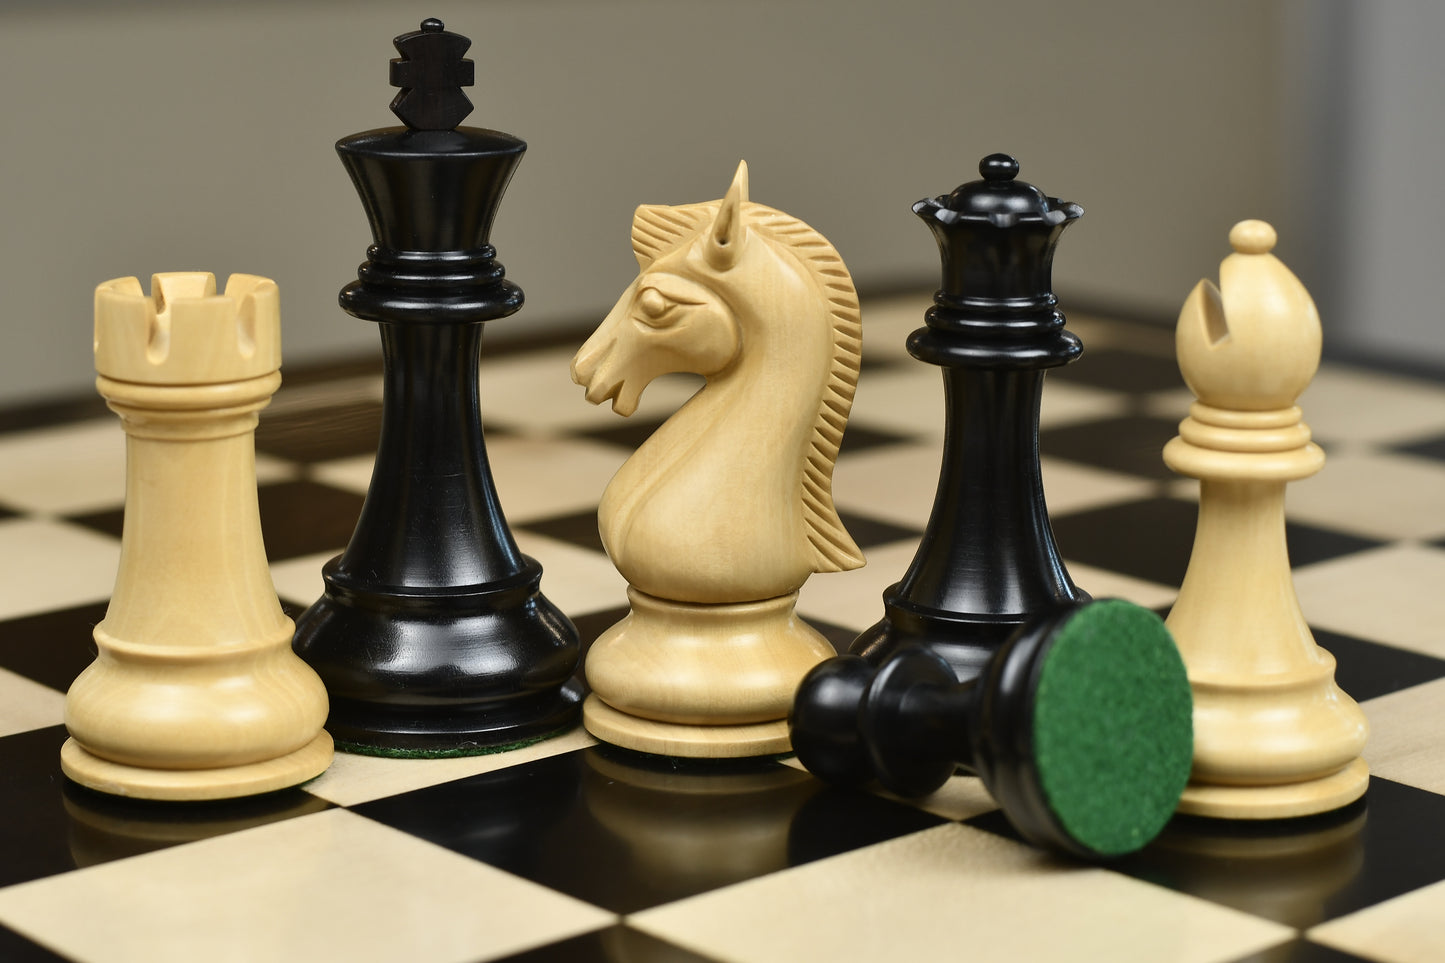 The Candidates Series Staunton Chess Pieces in Ebony / Box Wood - 3.75" King